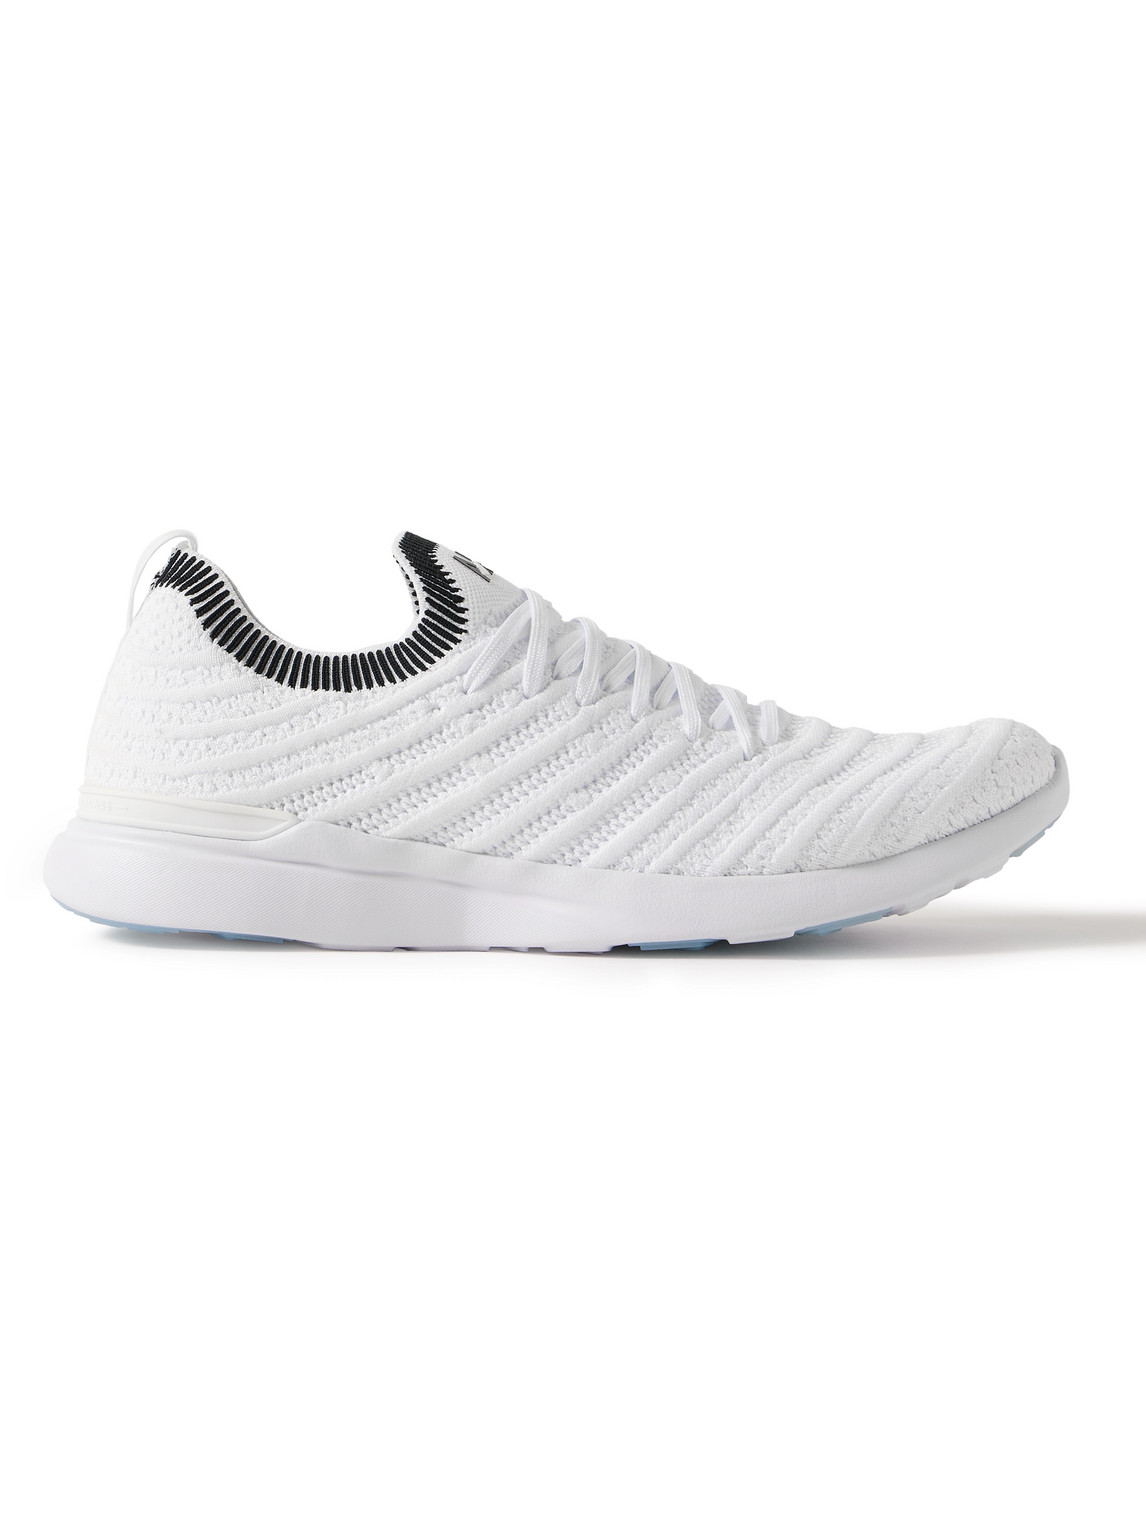 Apl Athletic Propulsion Labs Techloom Wave Running Sneakers In White